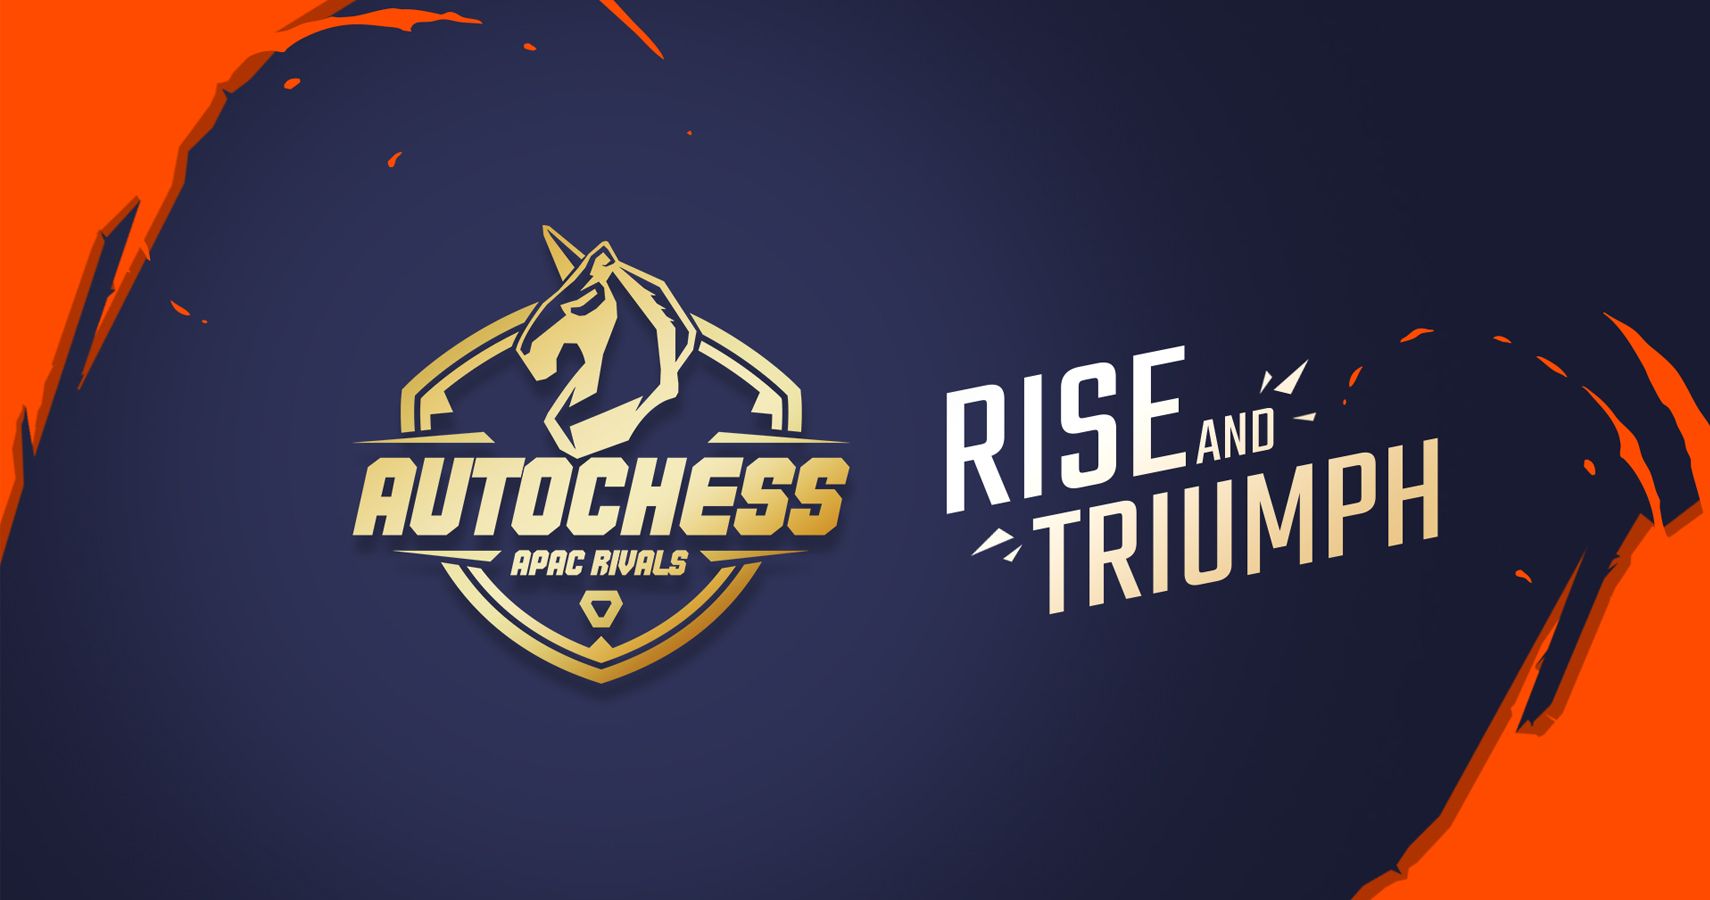 Auto Chess First Invitational Is Coming Soon